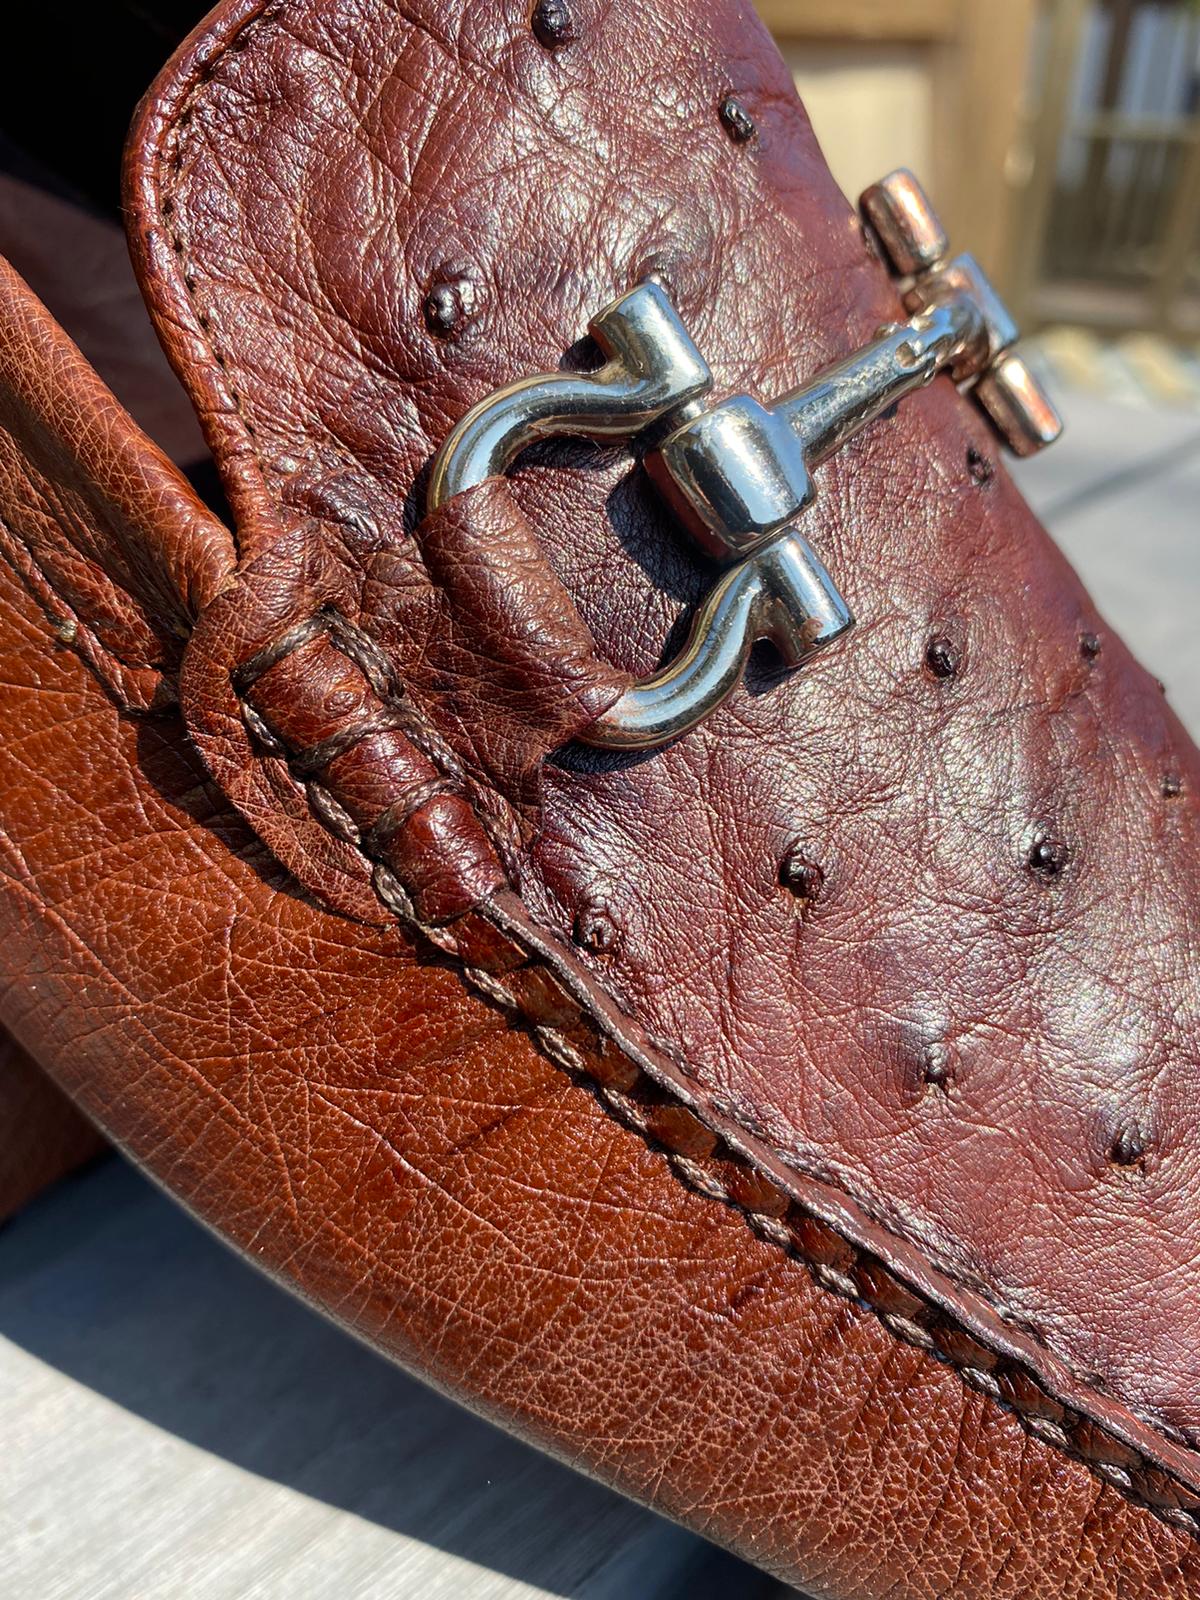 Ostrich Leather Products for Sale Online at Best Prices